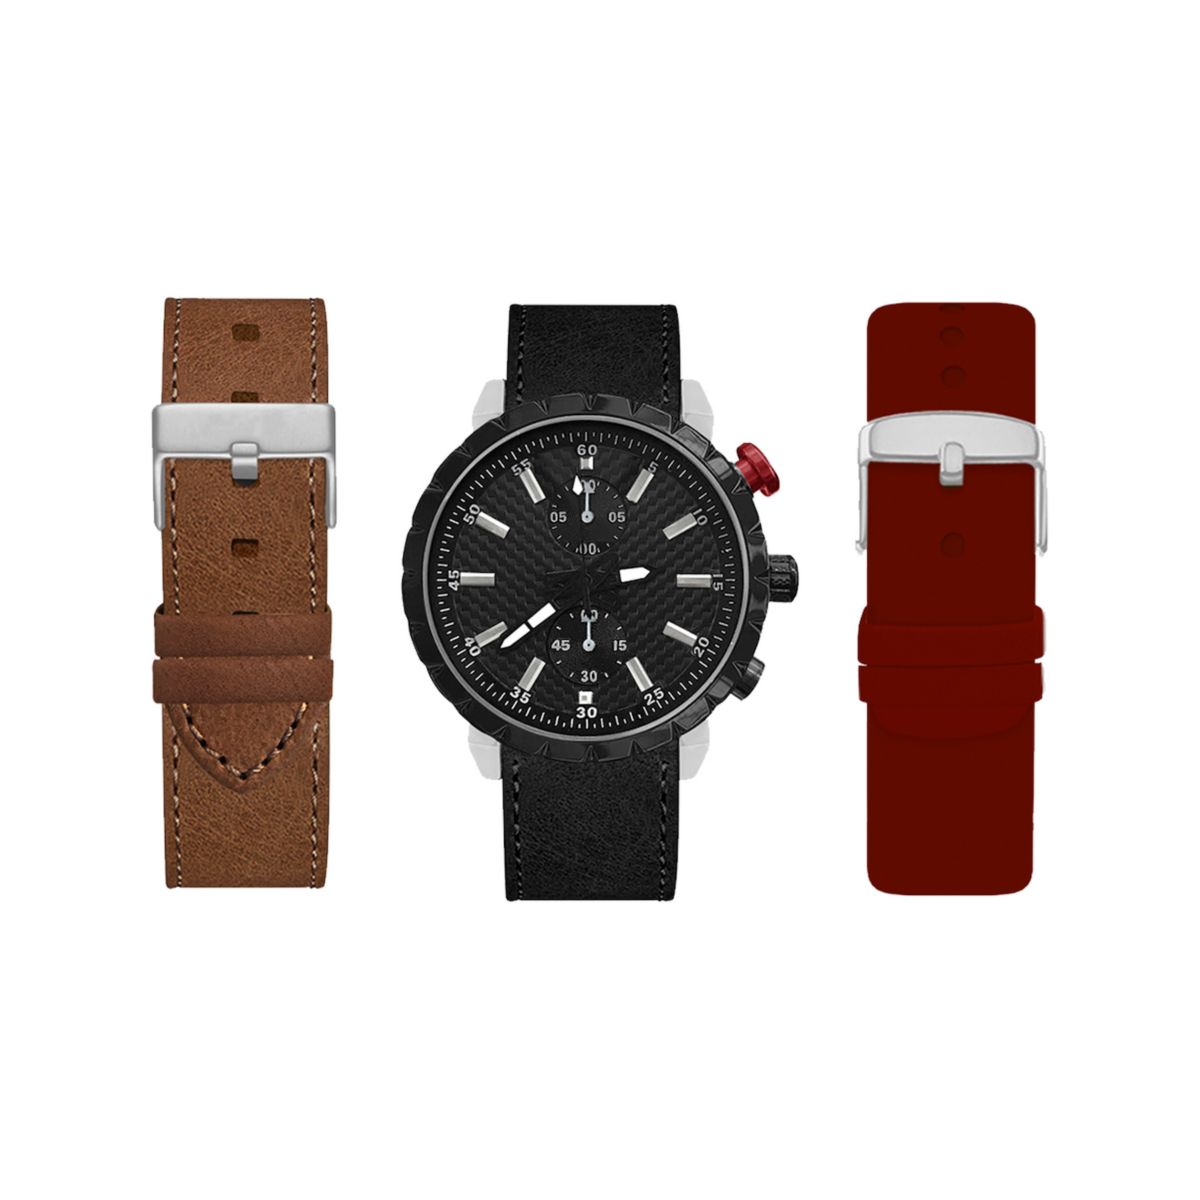 American Exchange Men's Black Watch with Burgundy, Brown, and Black Interchangeable Straps American Exchange